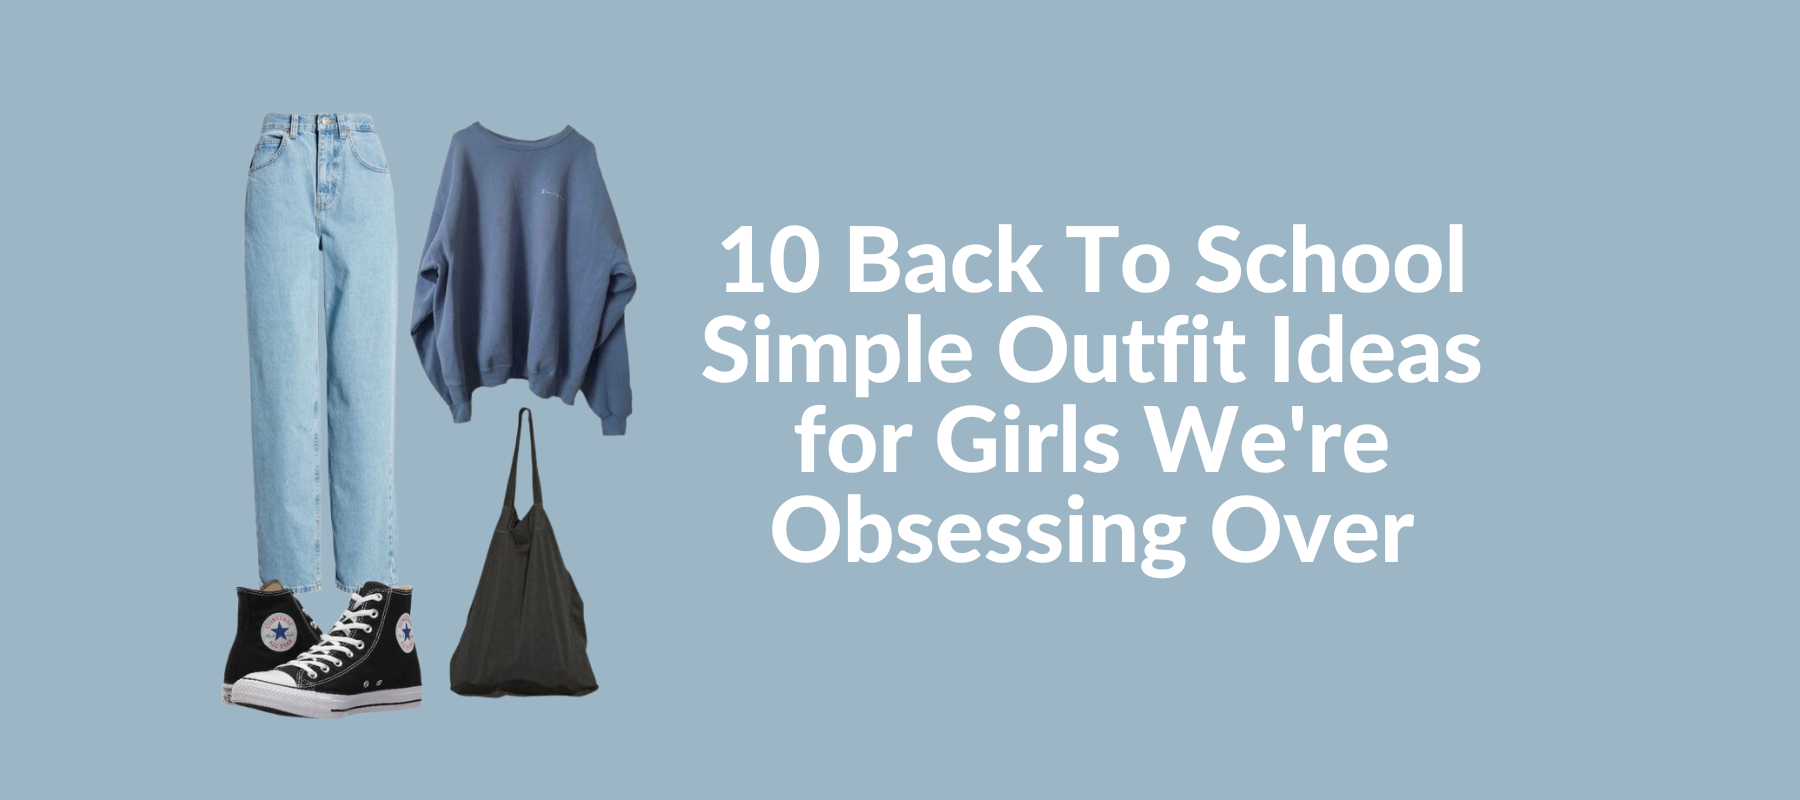 10 Back To School Simple Outfit Ideas for Girls We're Obsessing Over